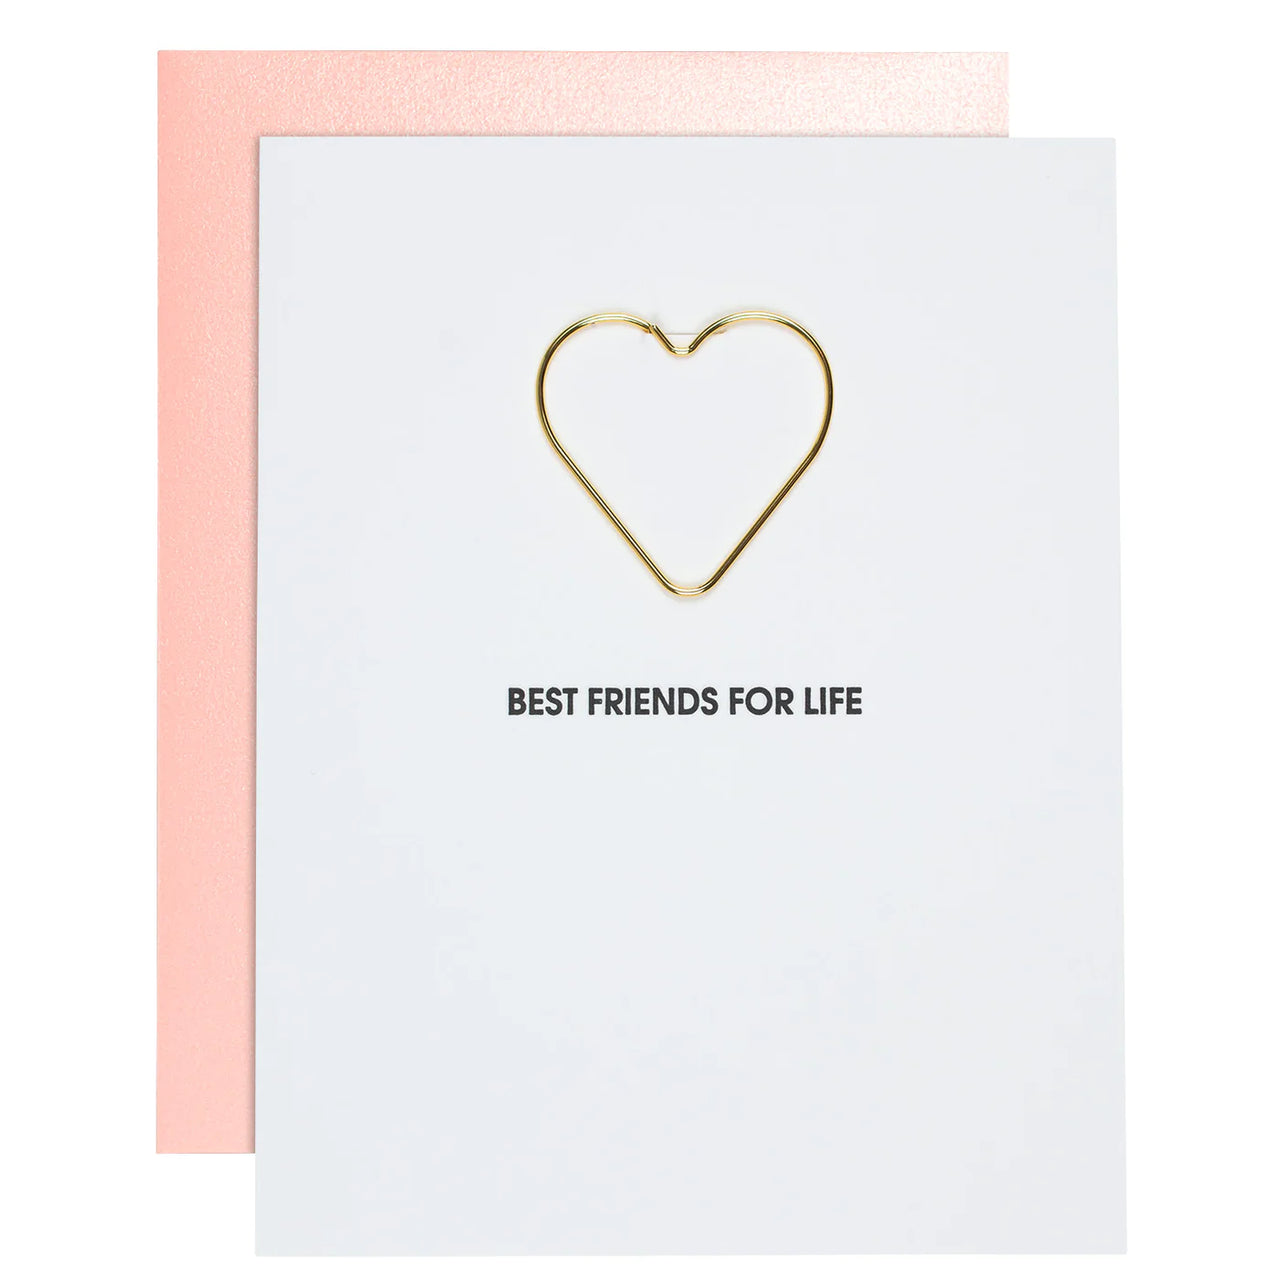 Best Friends For Life - Friendship Heart Paper Clip Card, Paper Gift by Chez Gagne | LIT Boutique